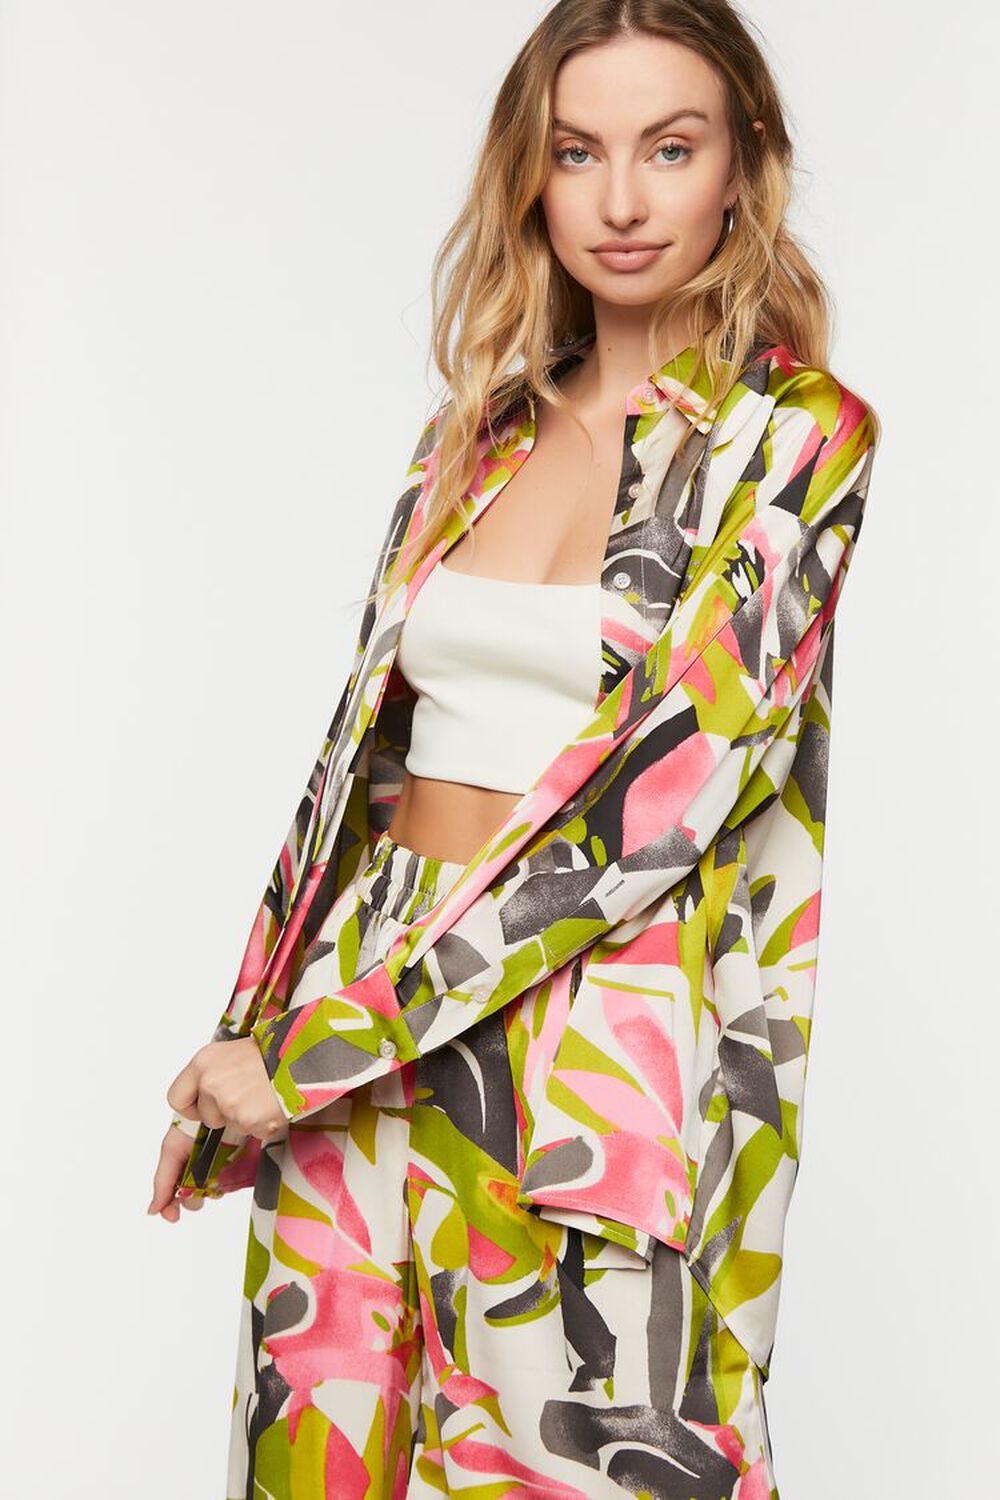 GREEN APPLE/MULTI Abstract Floral Oversized Shirt, image 1